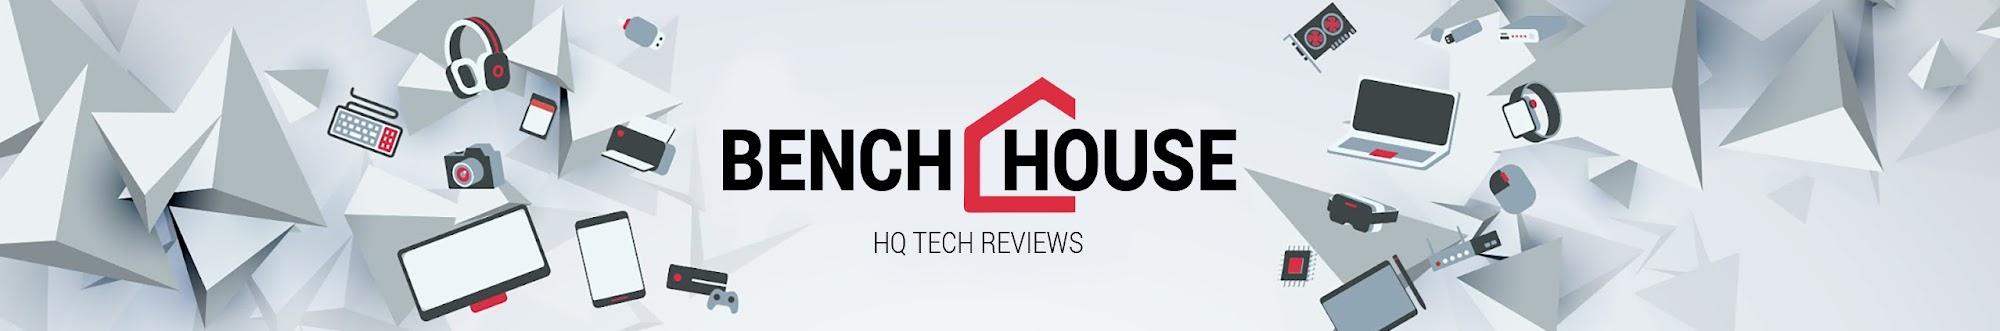 Bench House